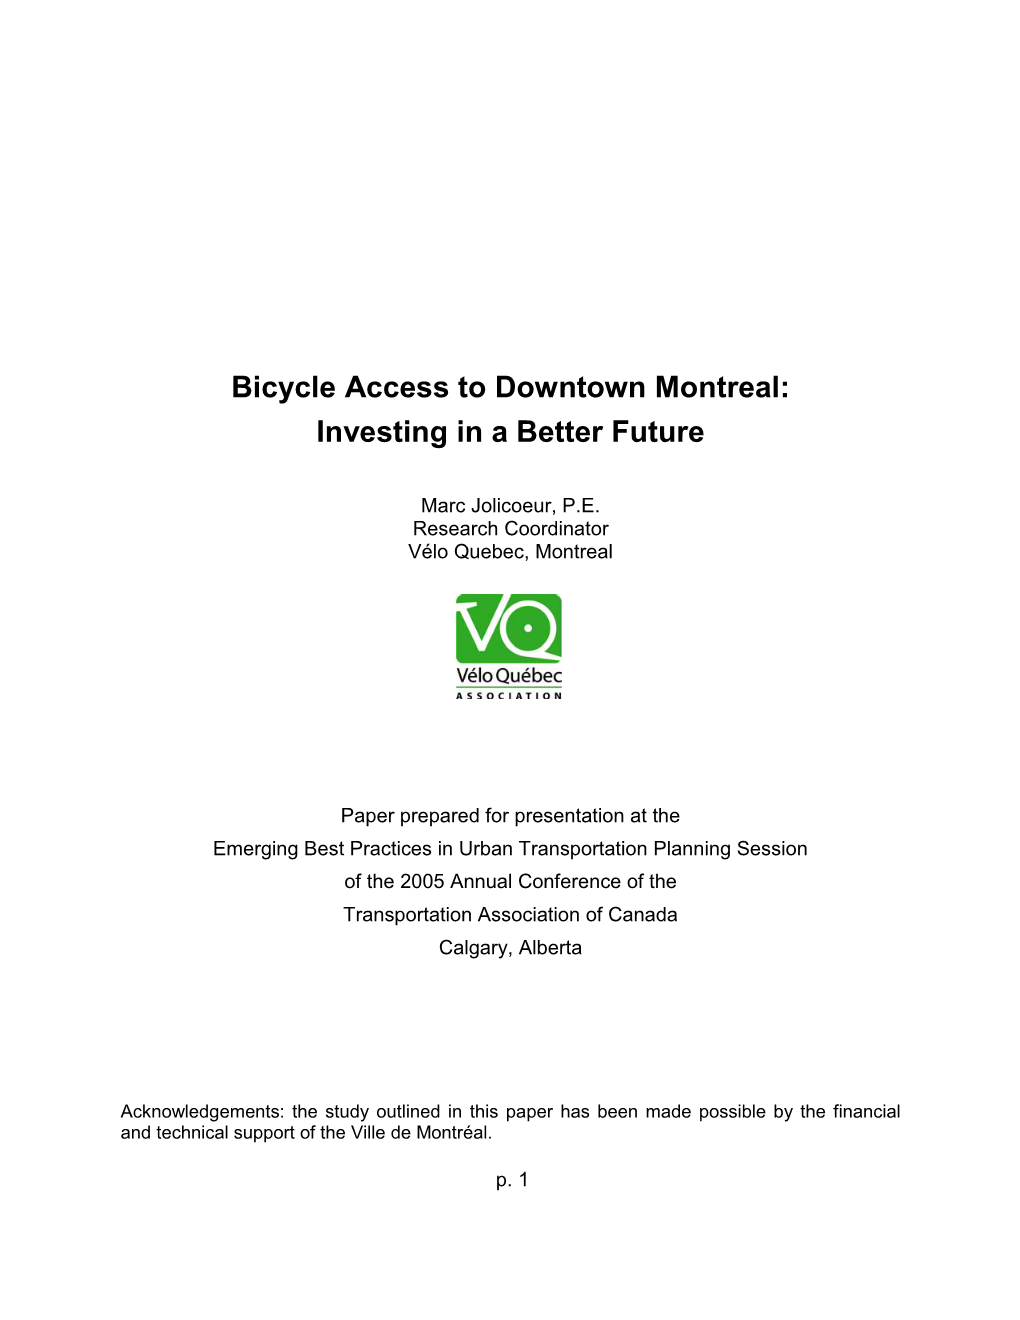 Bicycle Access to Downtown Montreal: Investing in a Better Future